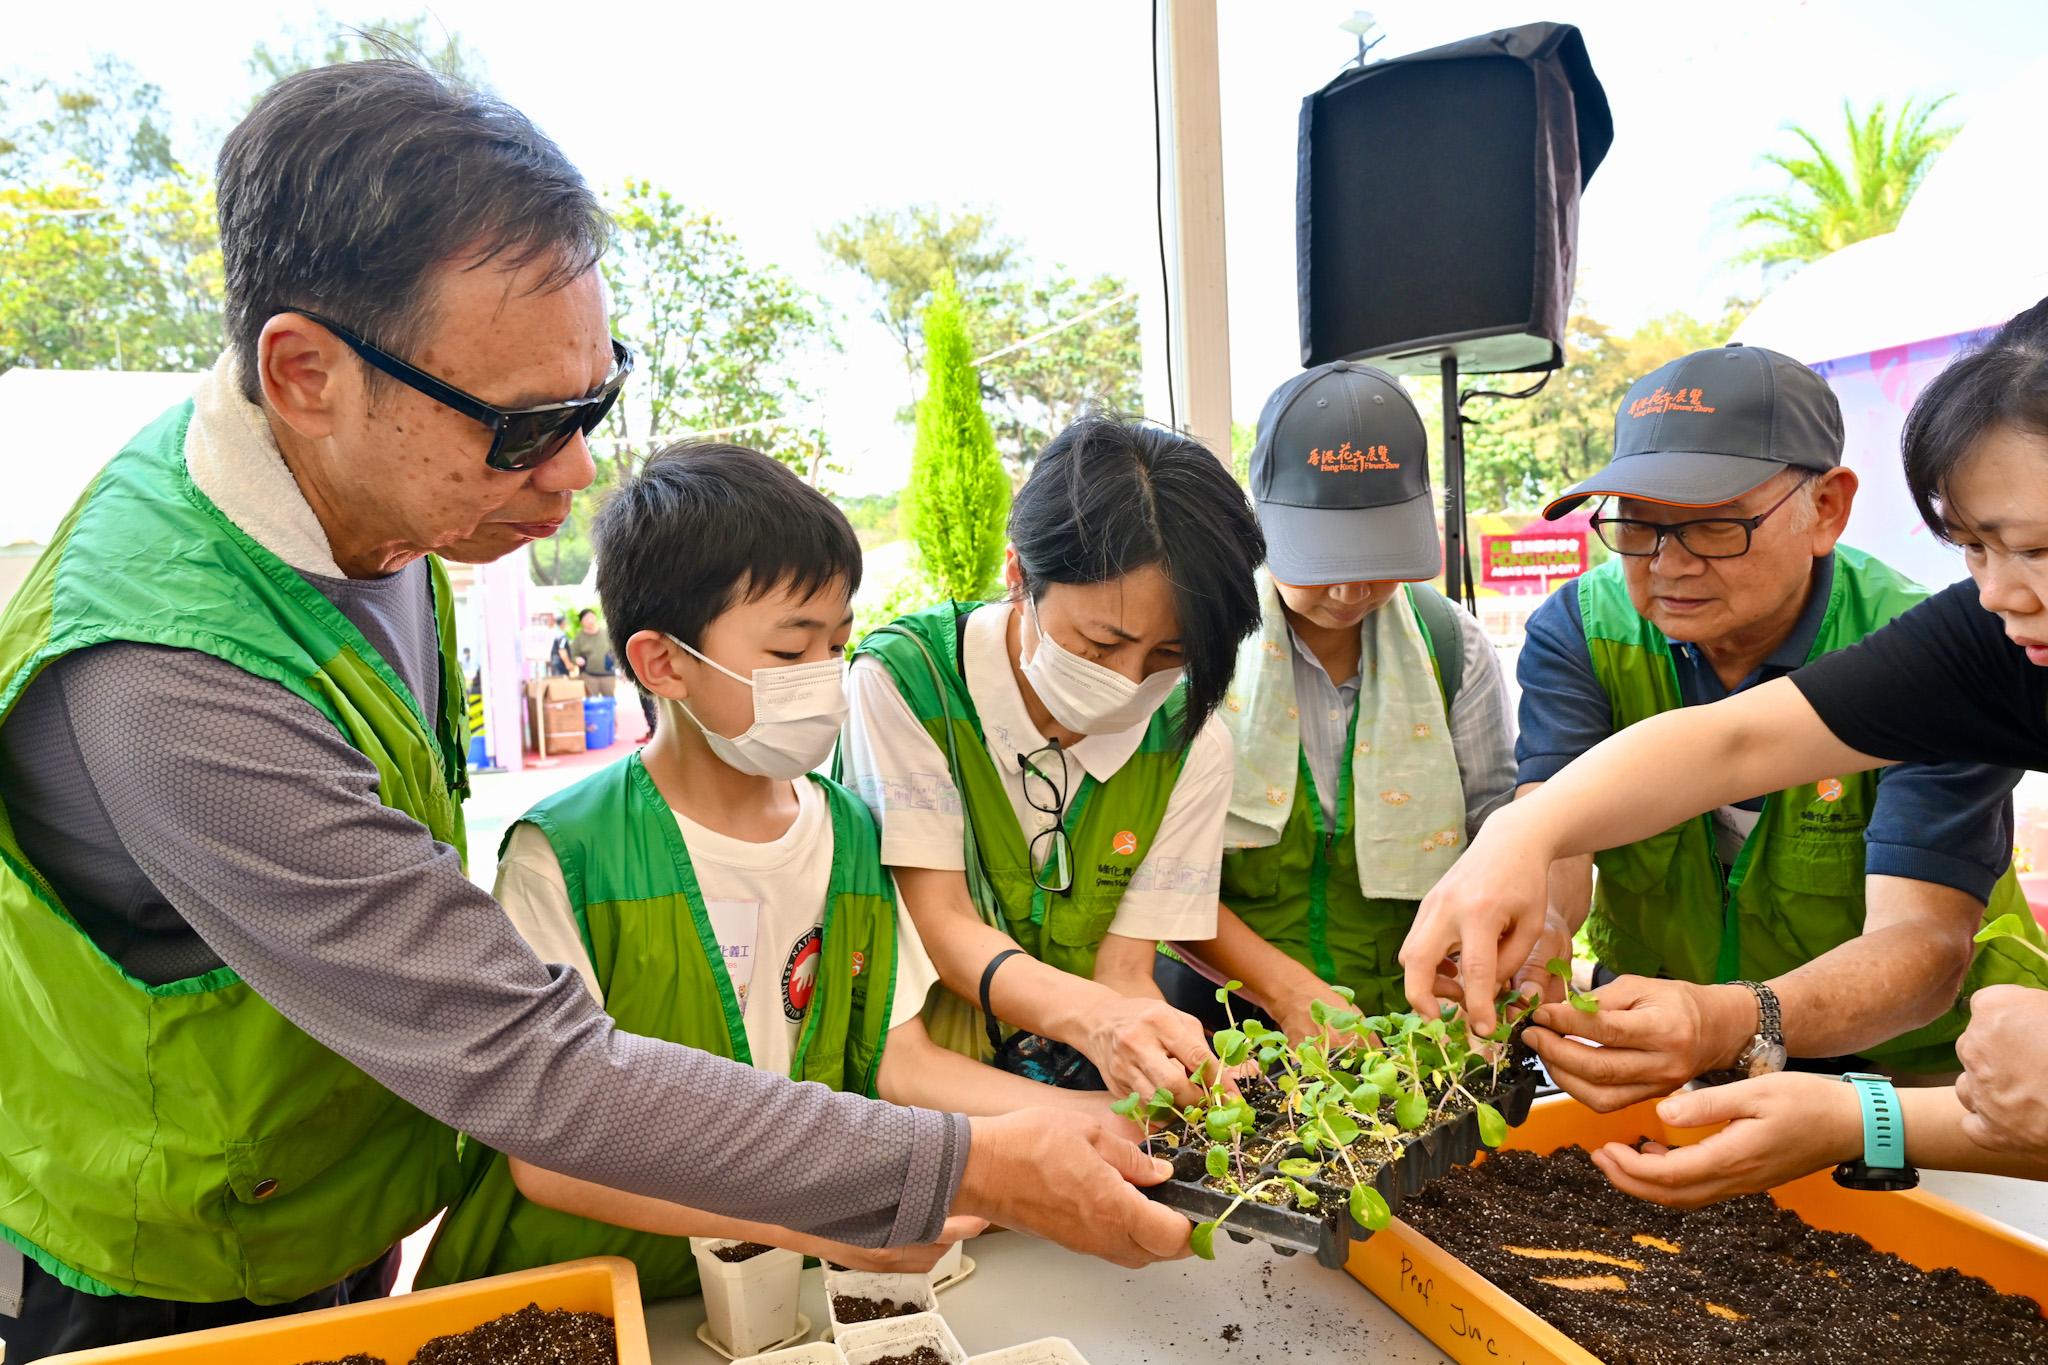 The Leisure and Cultural Services Department is once again holding Green Recycling Day (GRD) activities upon the conclusion of the Hong Kong Flower Show. The GRD activities were held today (March 25) and will continue tomorrow (March 26) at Victoria Park to reinforce green measures and reduce waste. Photo shows volunteers participating in a workshop to learn more about planting.
